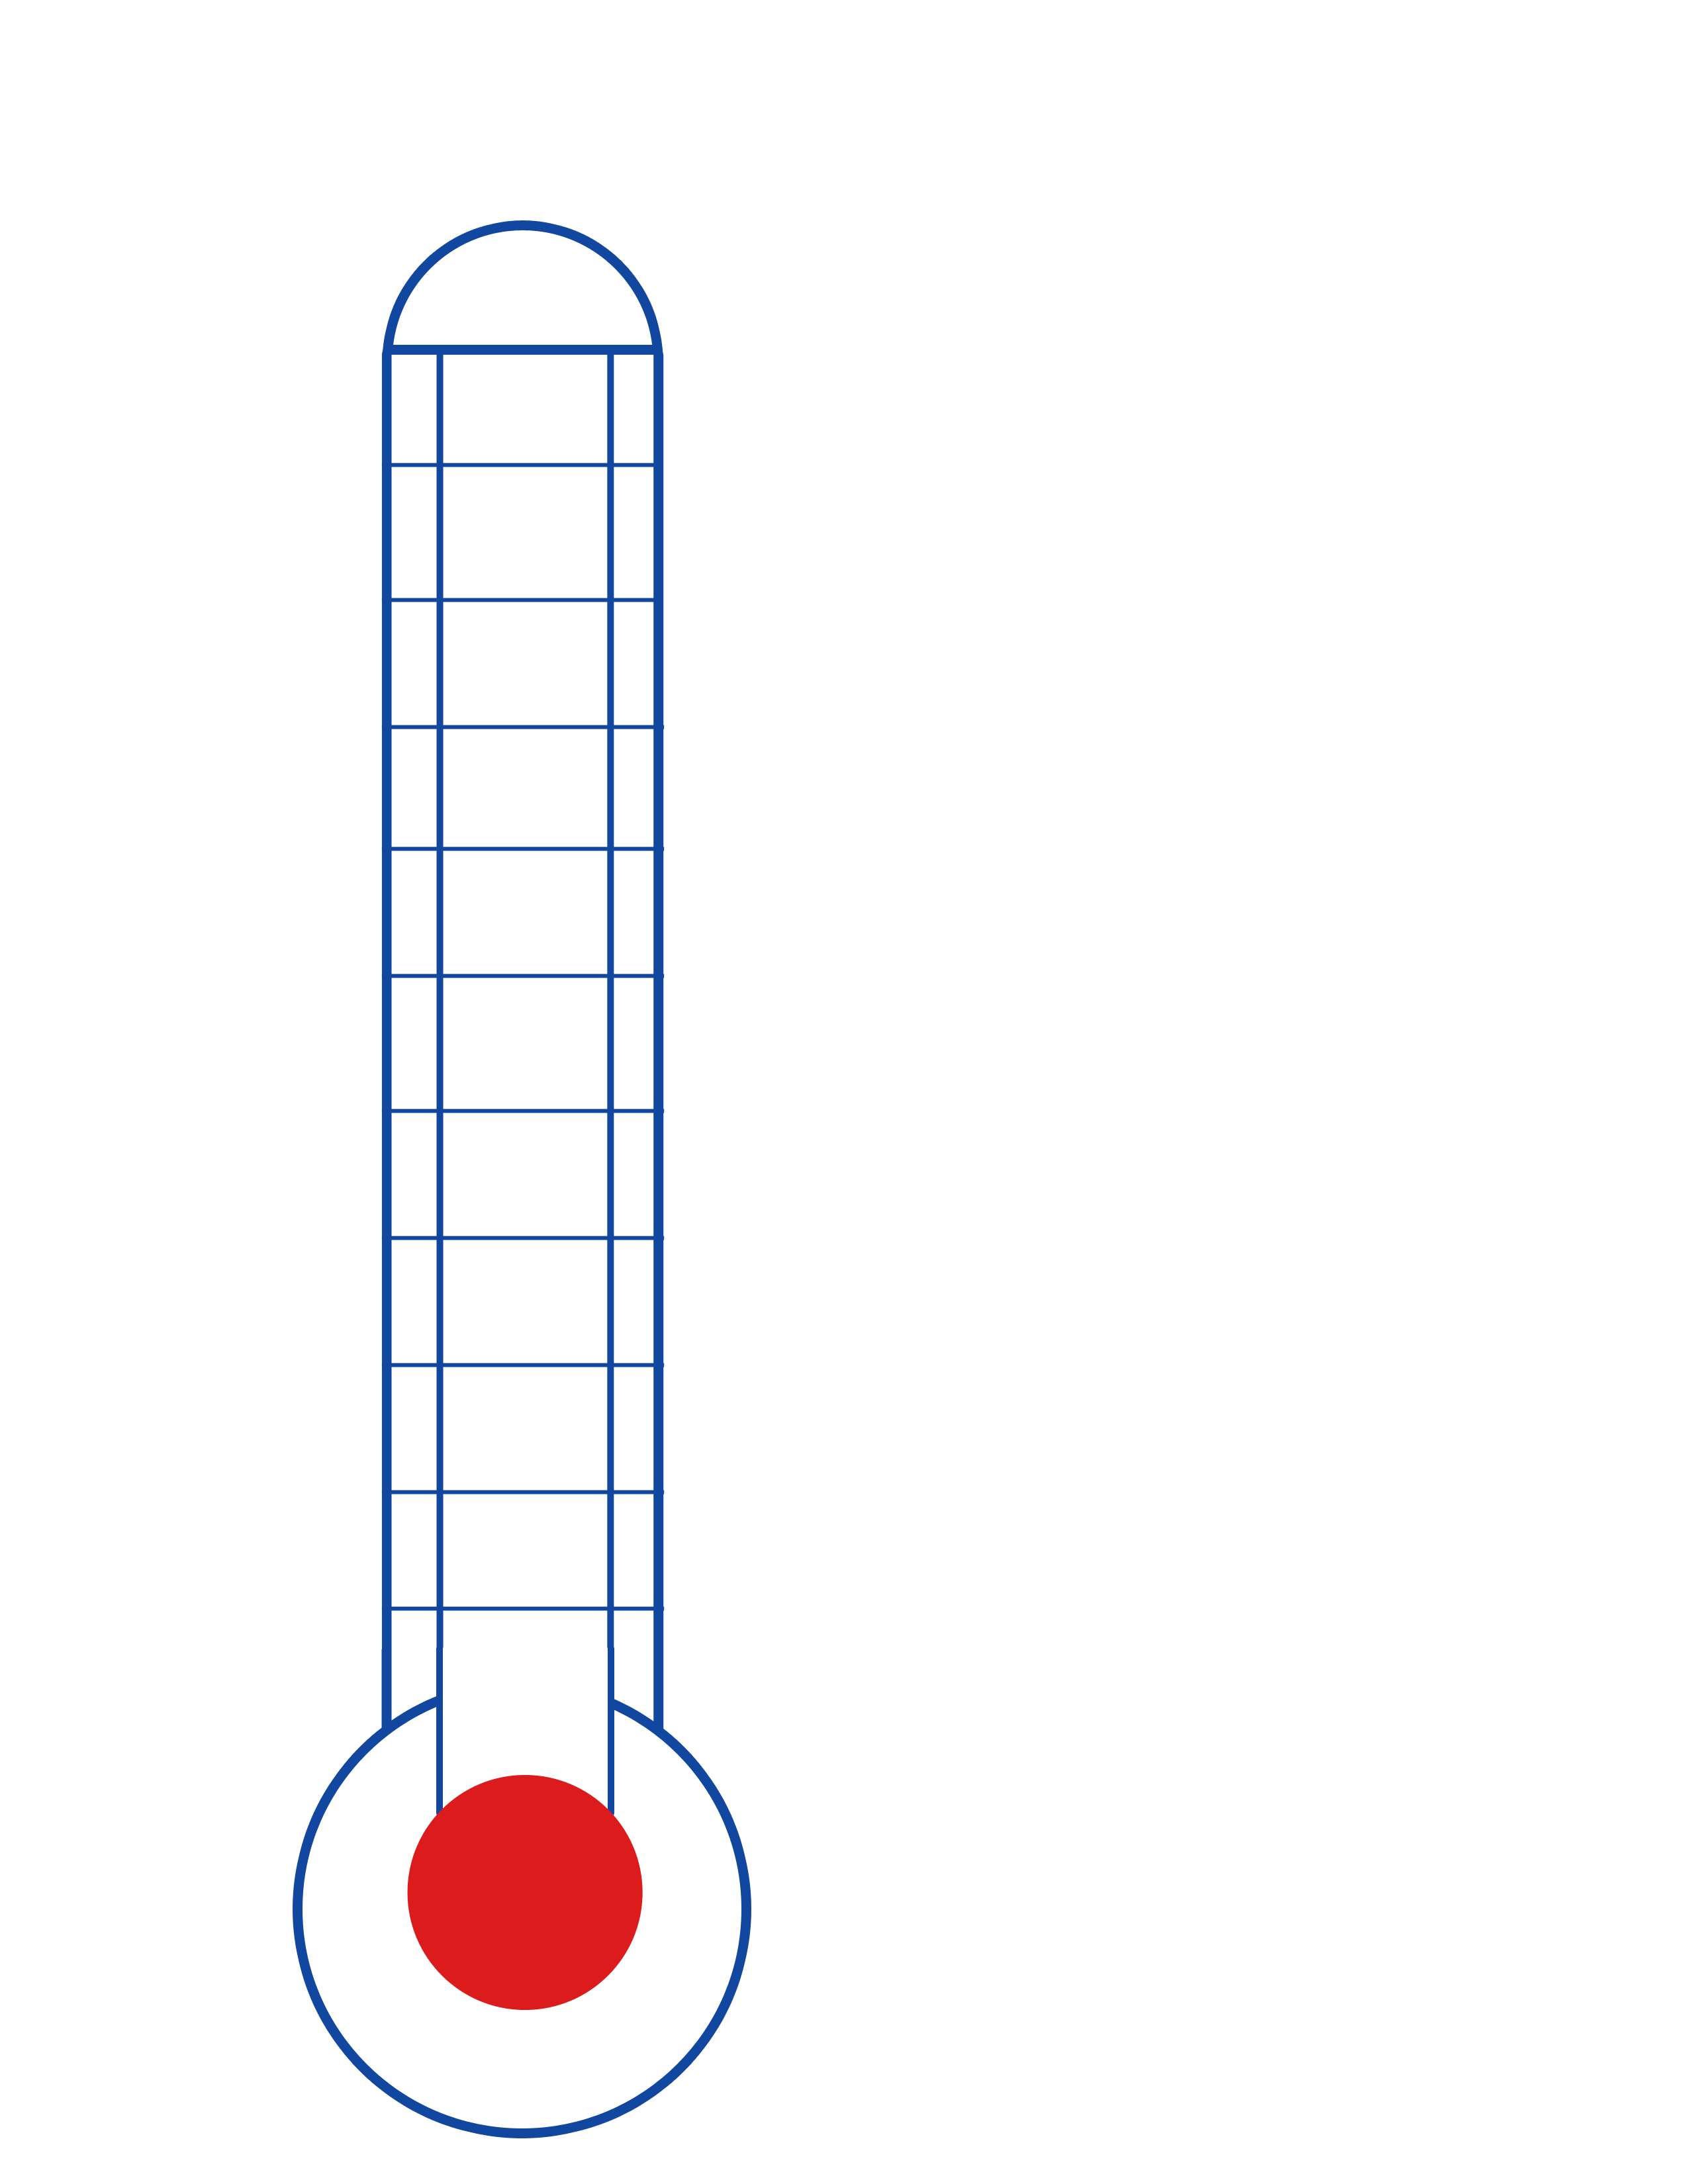 Blank Thermometer Scales